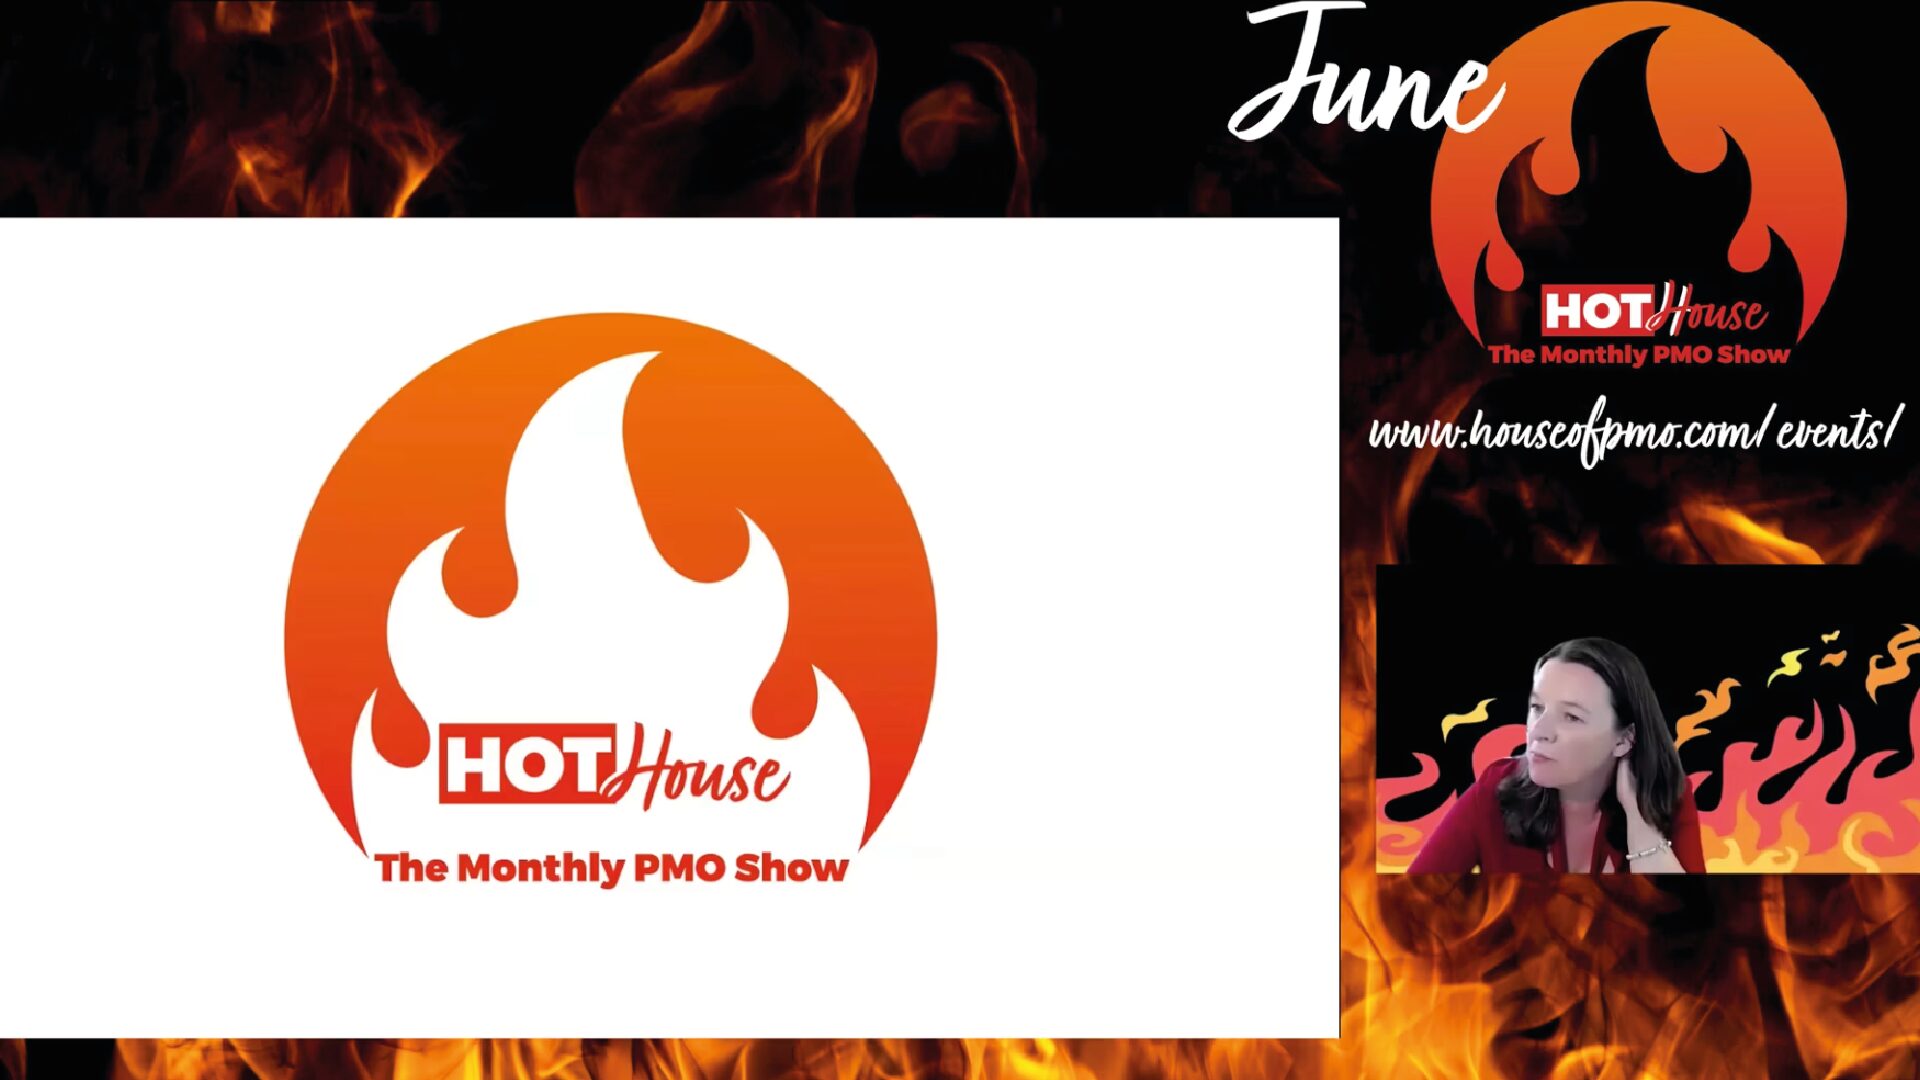 thumbnail for the hot house event, which shows the introduction slide and the host Lindsay Scott.